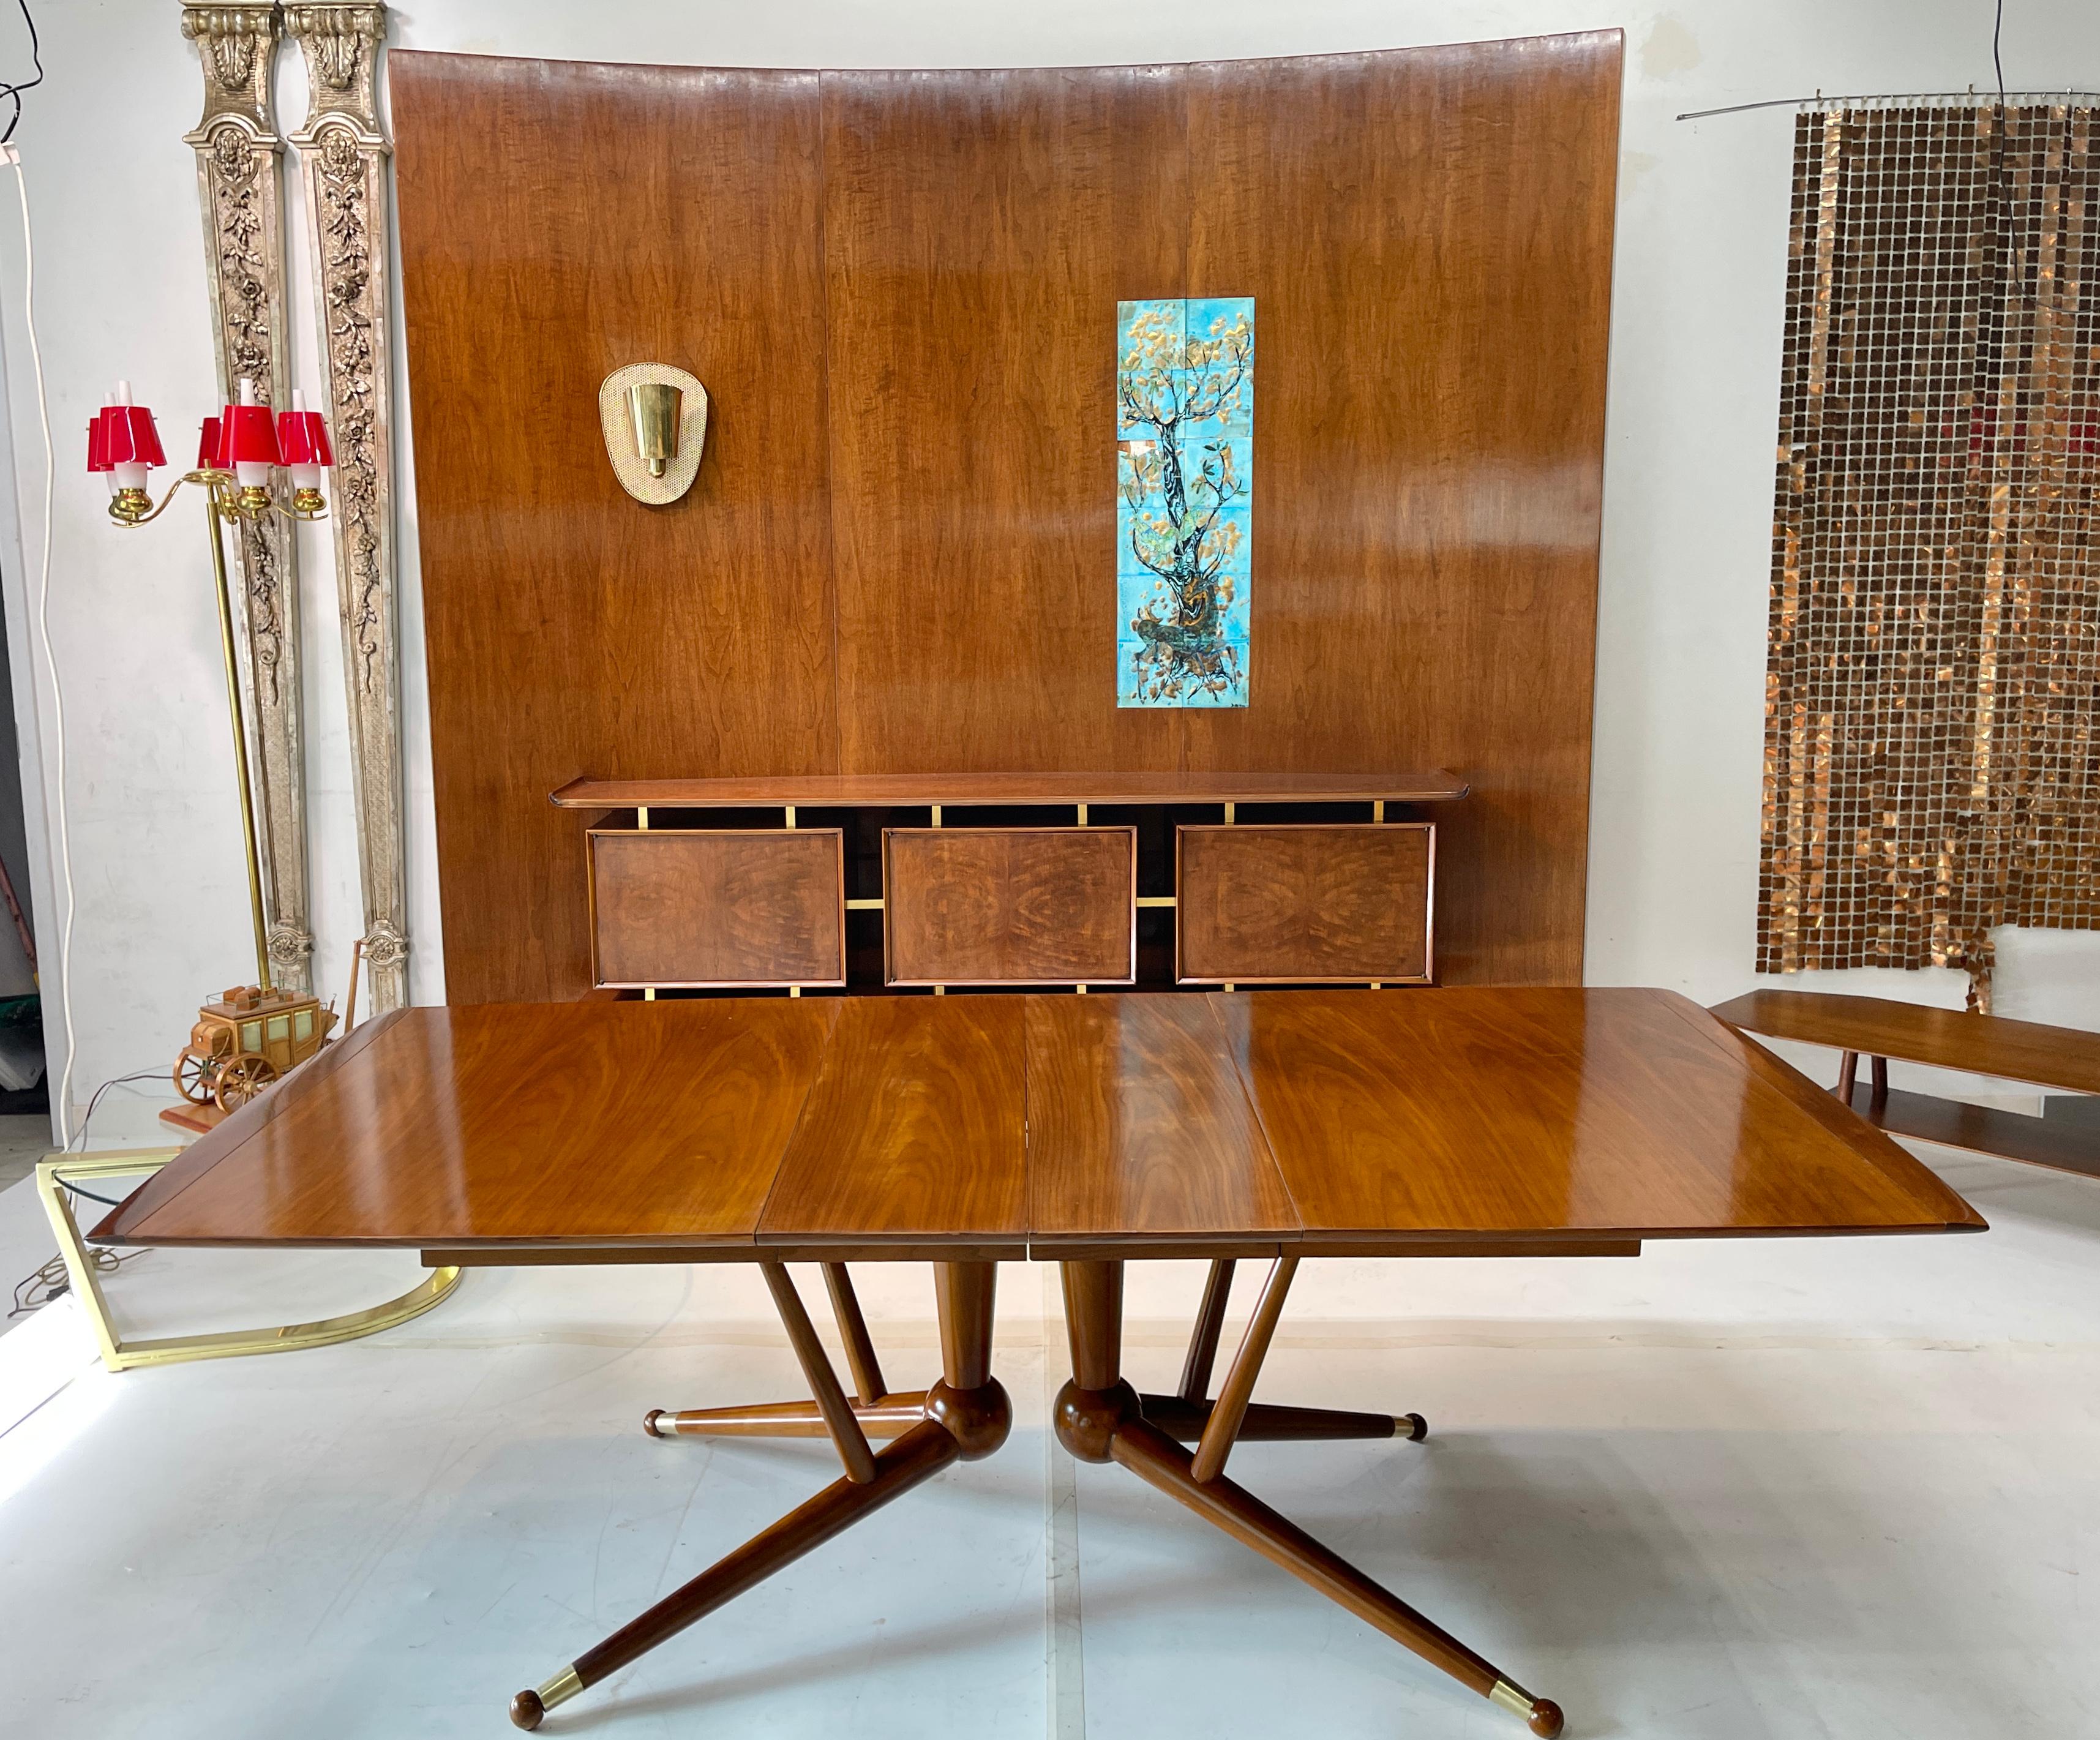 American Mid-Century Modern expandable dining table with extraordinary base which appears to defy gravity. I need my 10th grade geometry teacher to explain the theorem behind this amazingly sculptural structure which resembles a tetrahedral